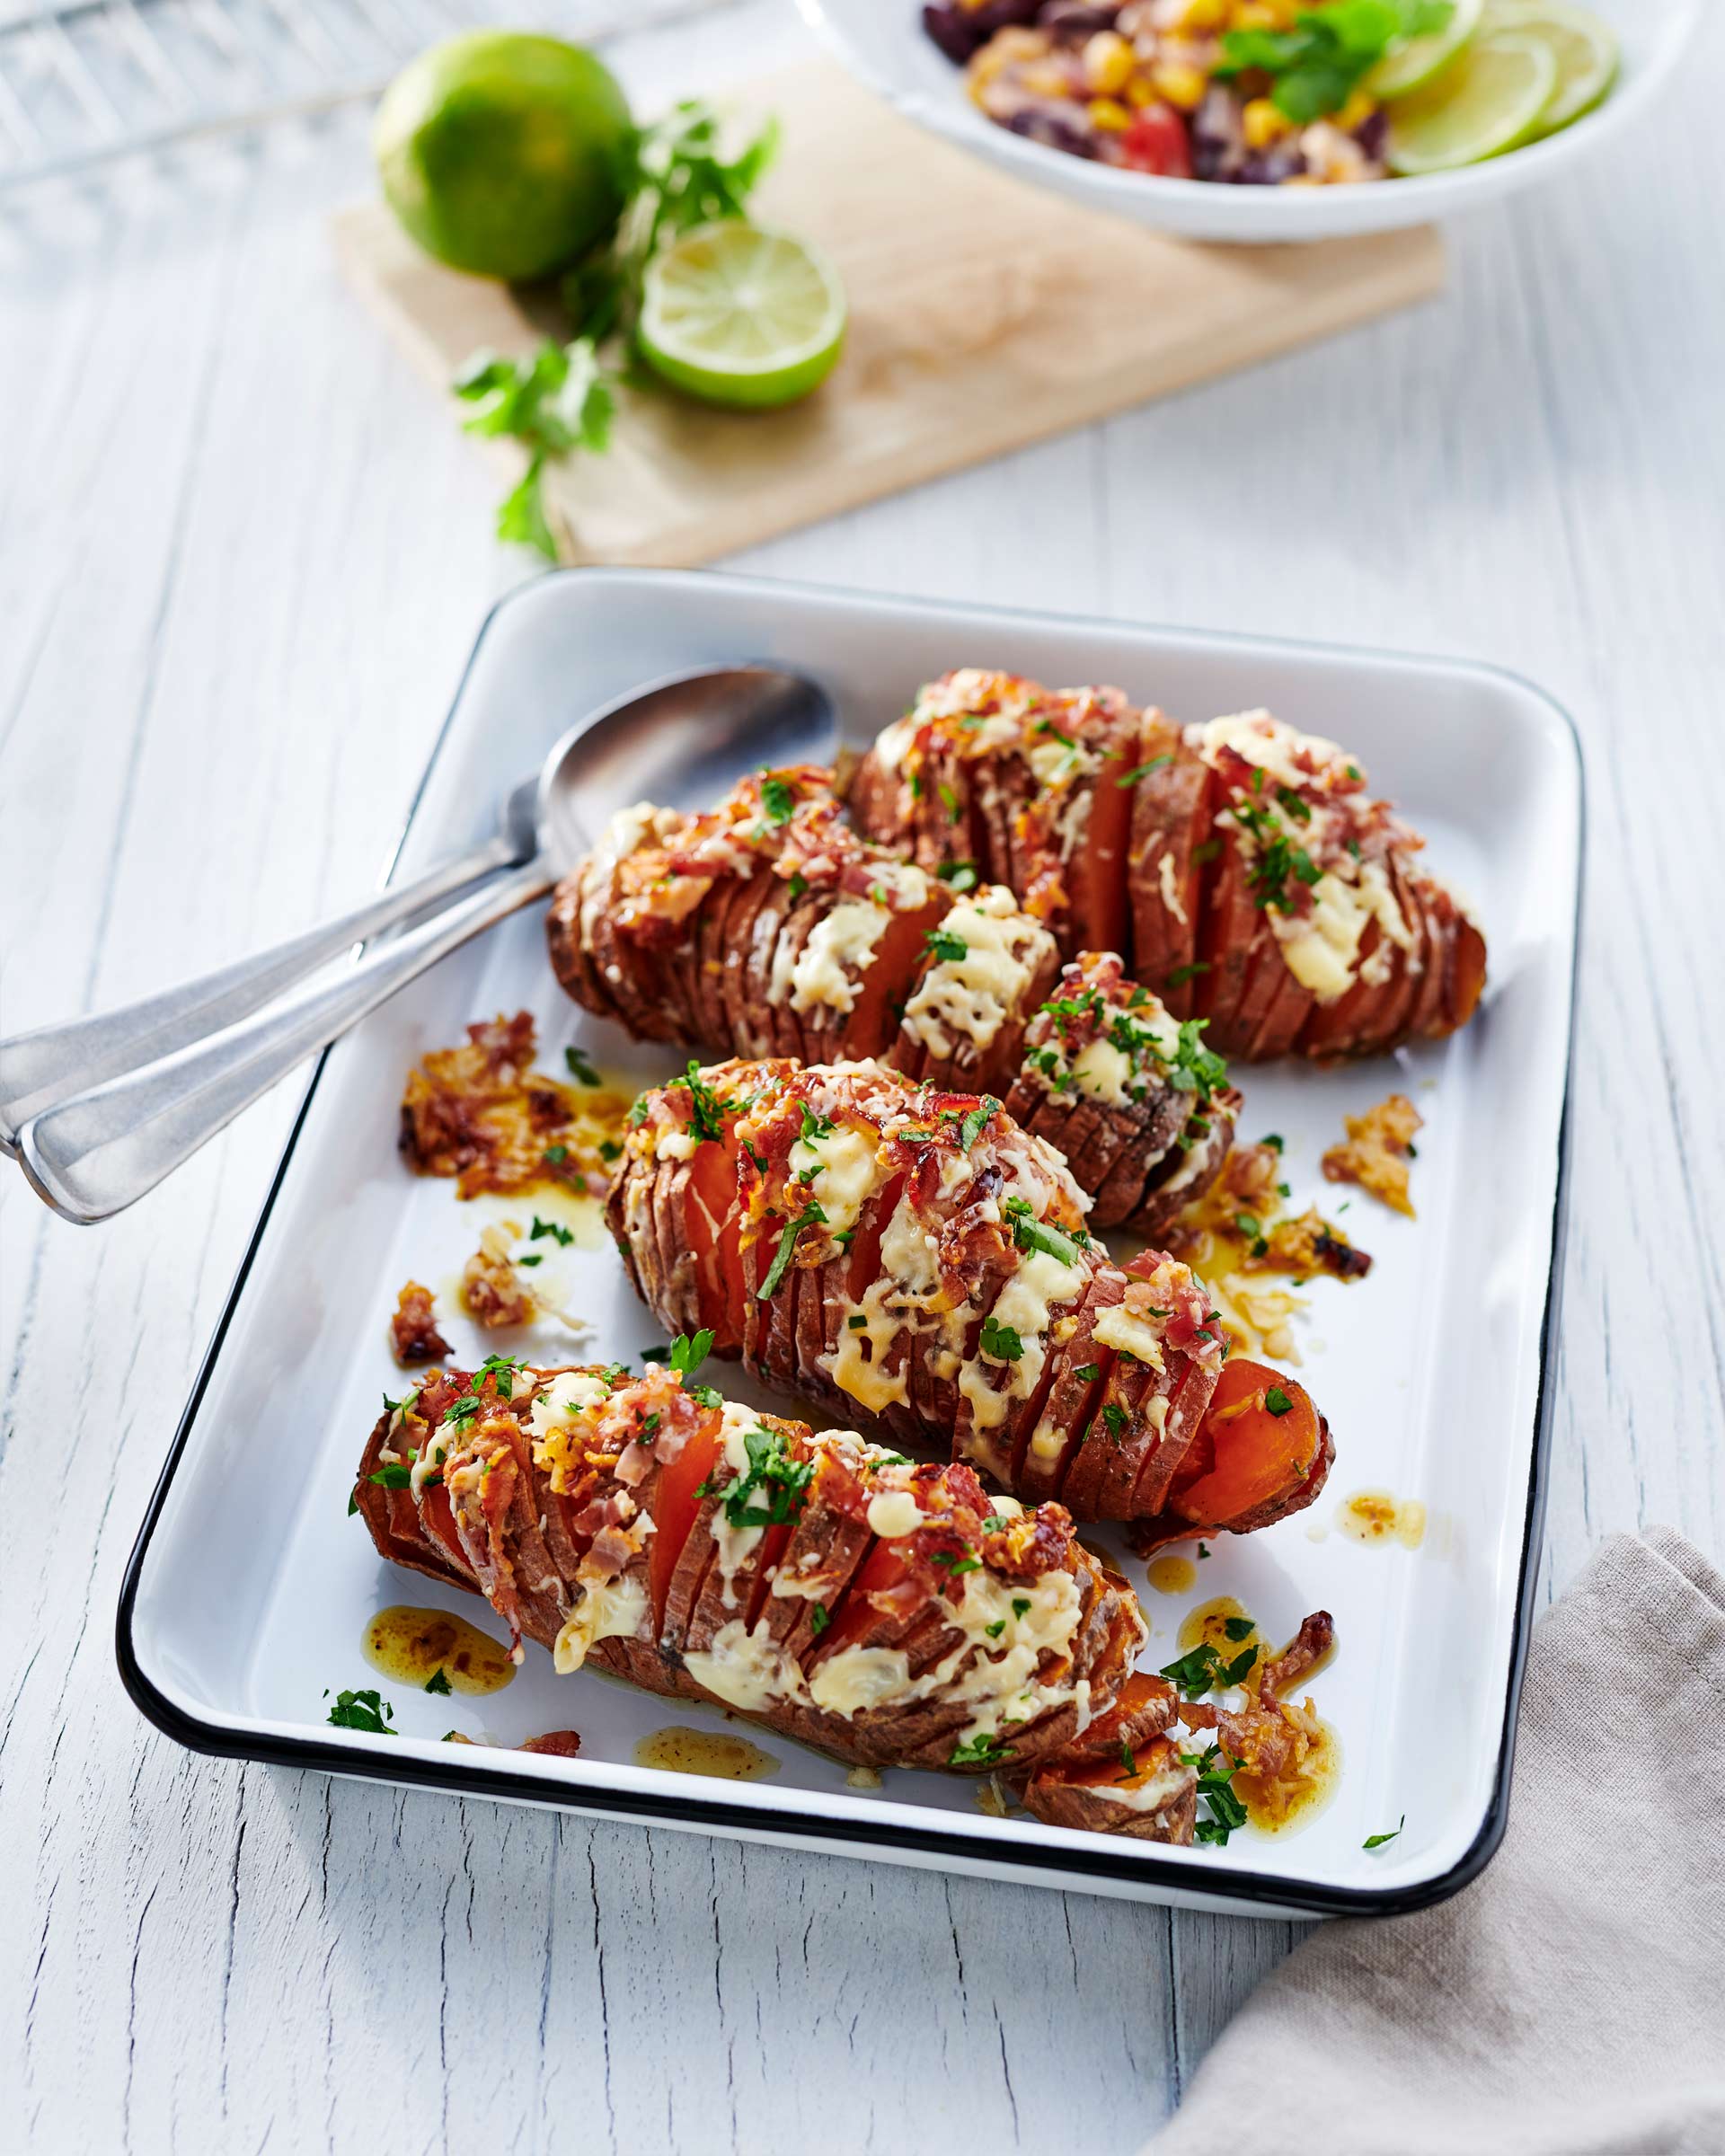 Hasselback Sweet Potatoes “Mexican Style”